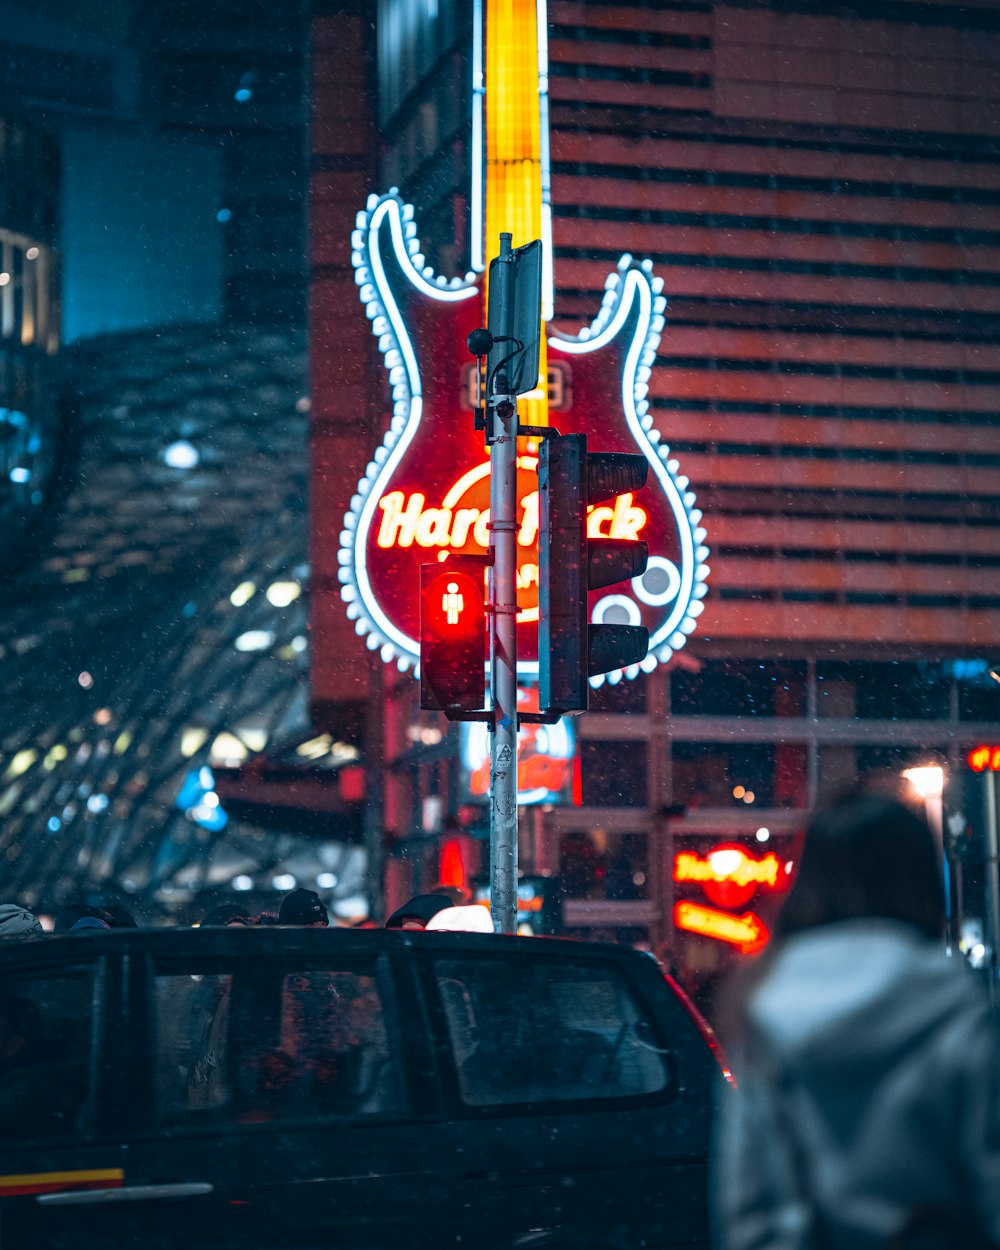 a neon guitar sign on the side of a building